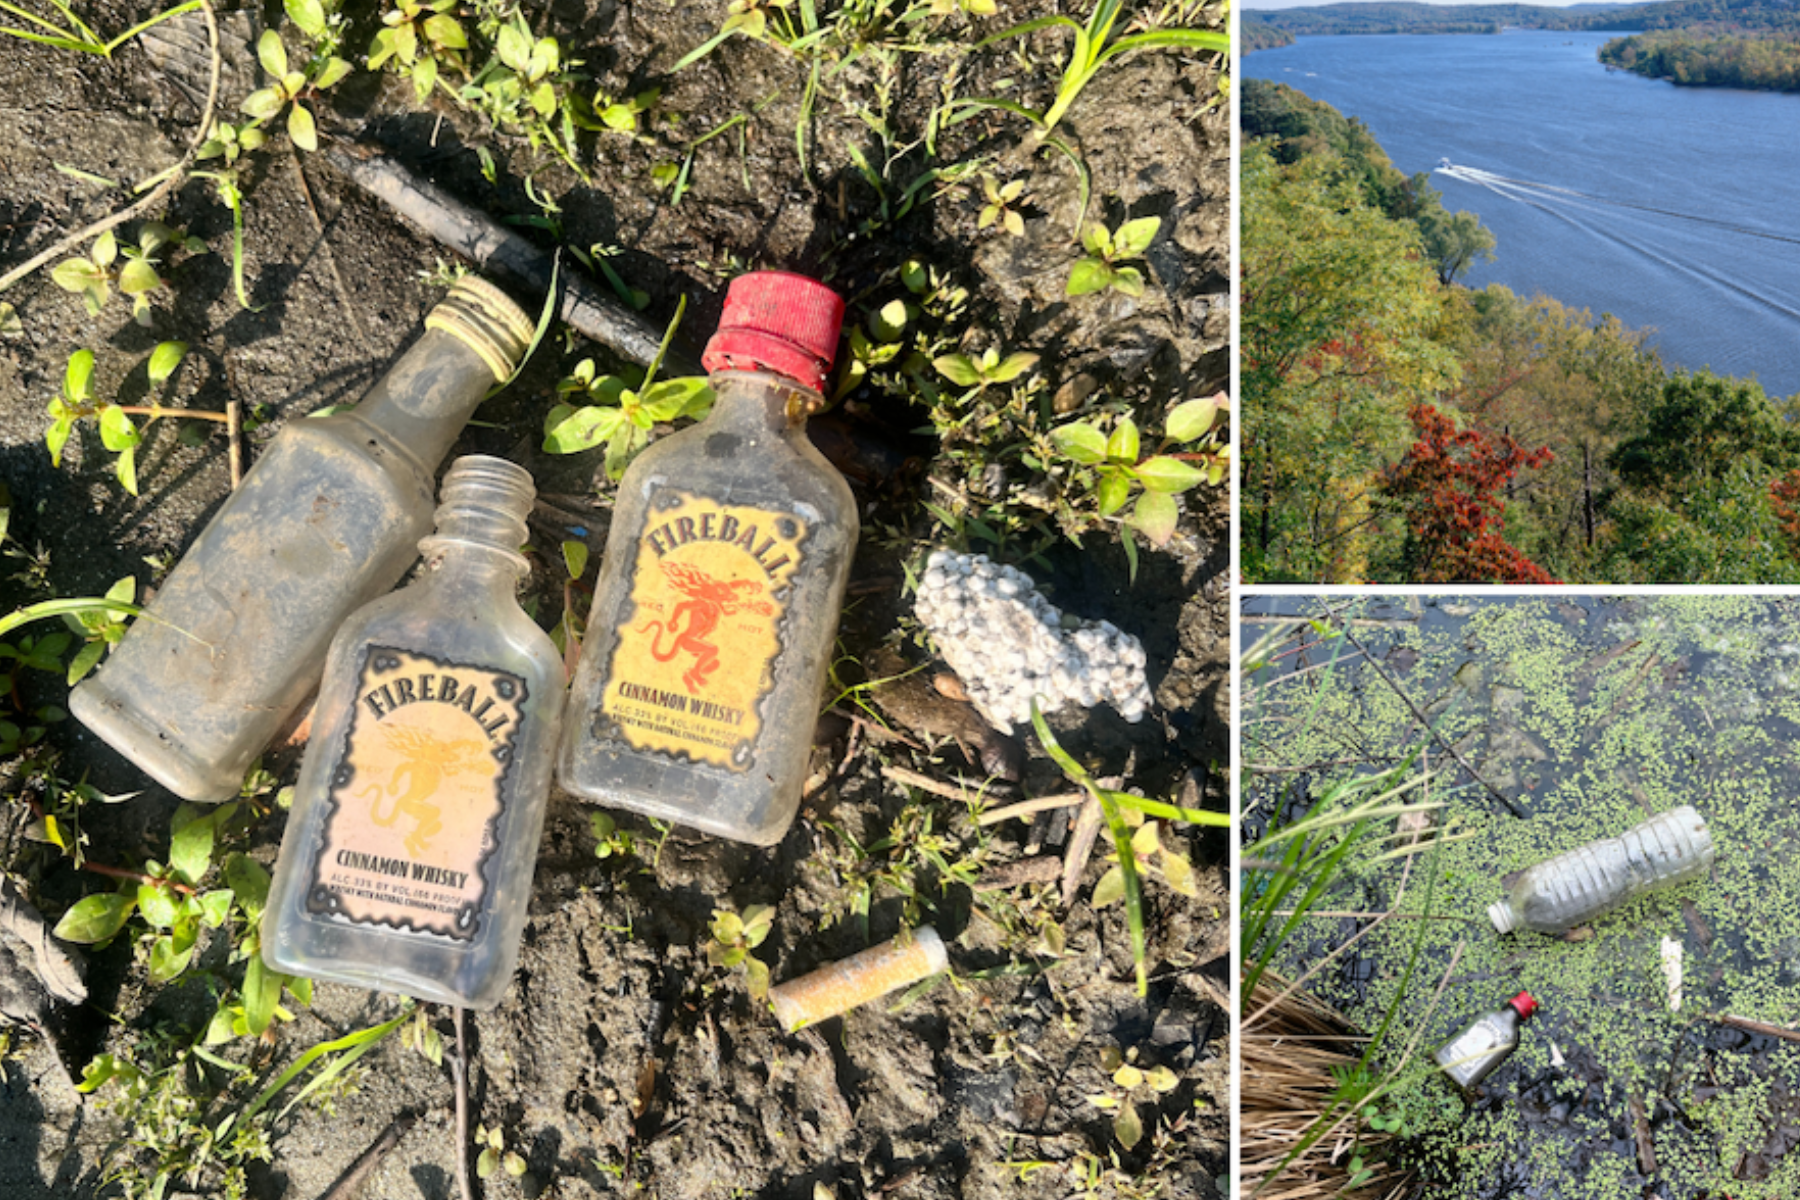 Collage of three images including discarded and dirty nip bottles on the ground, plastic bottles floating in the water, and a landscape photo of the Connecticut River.